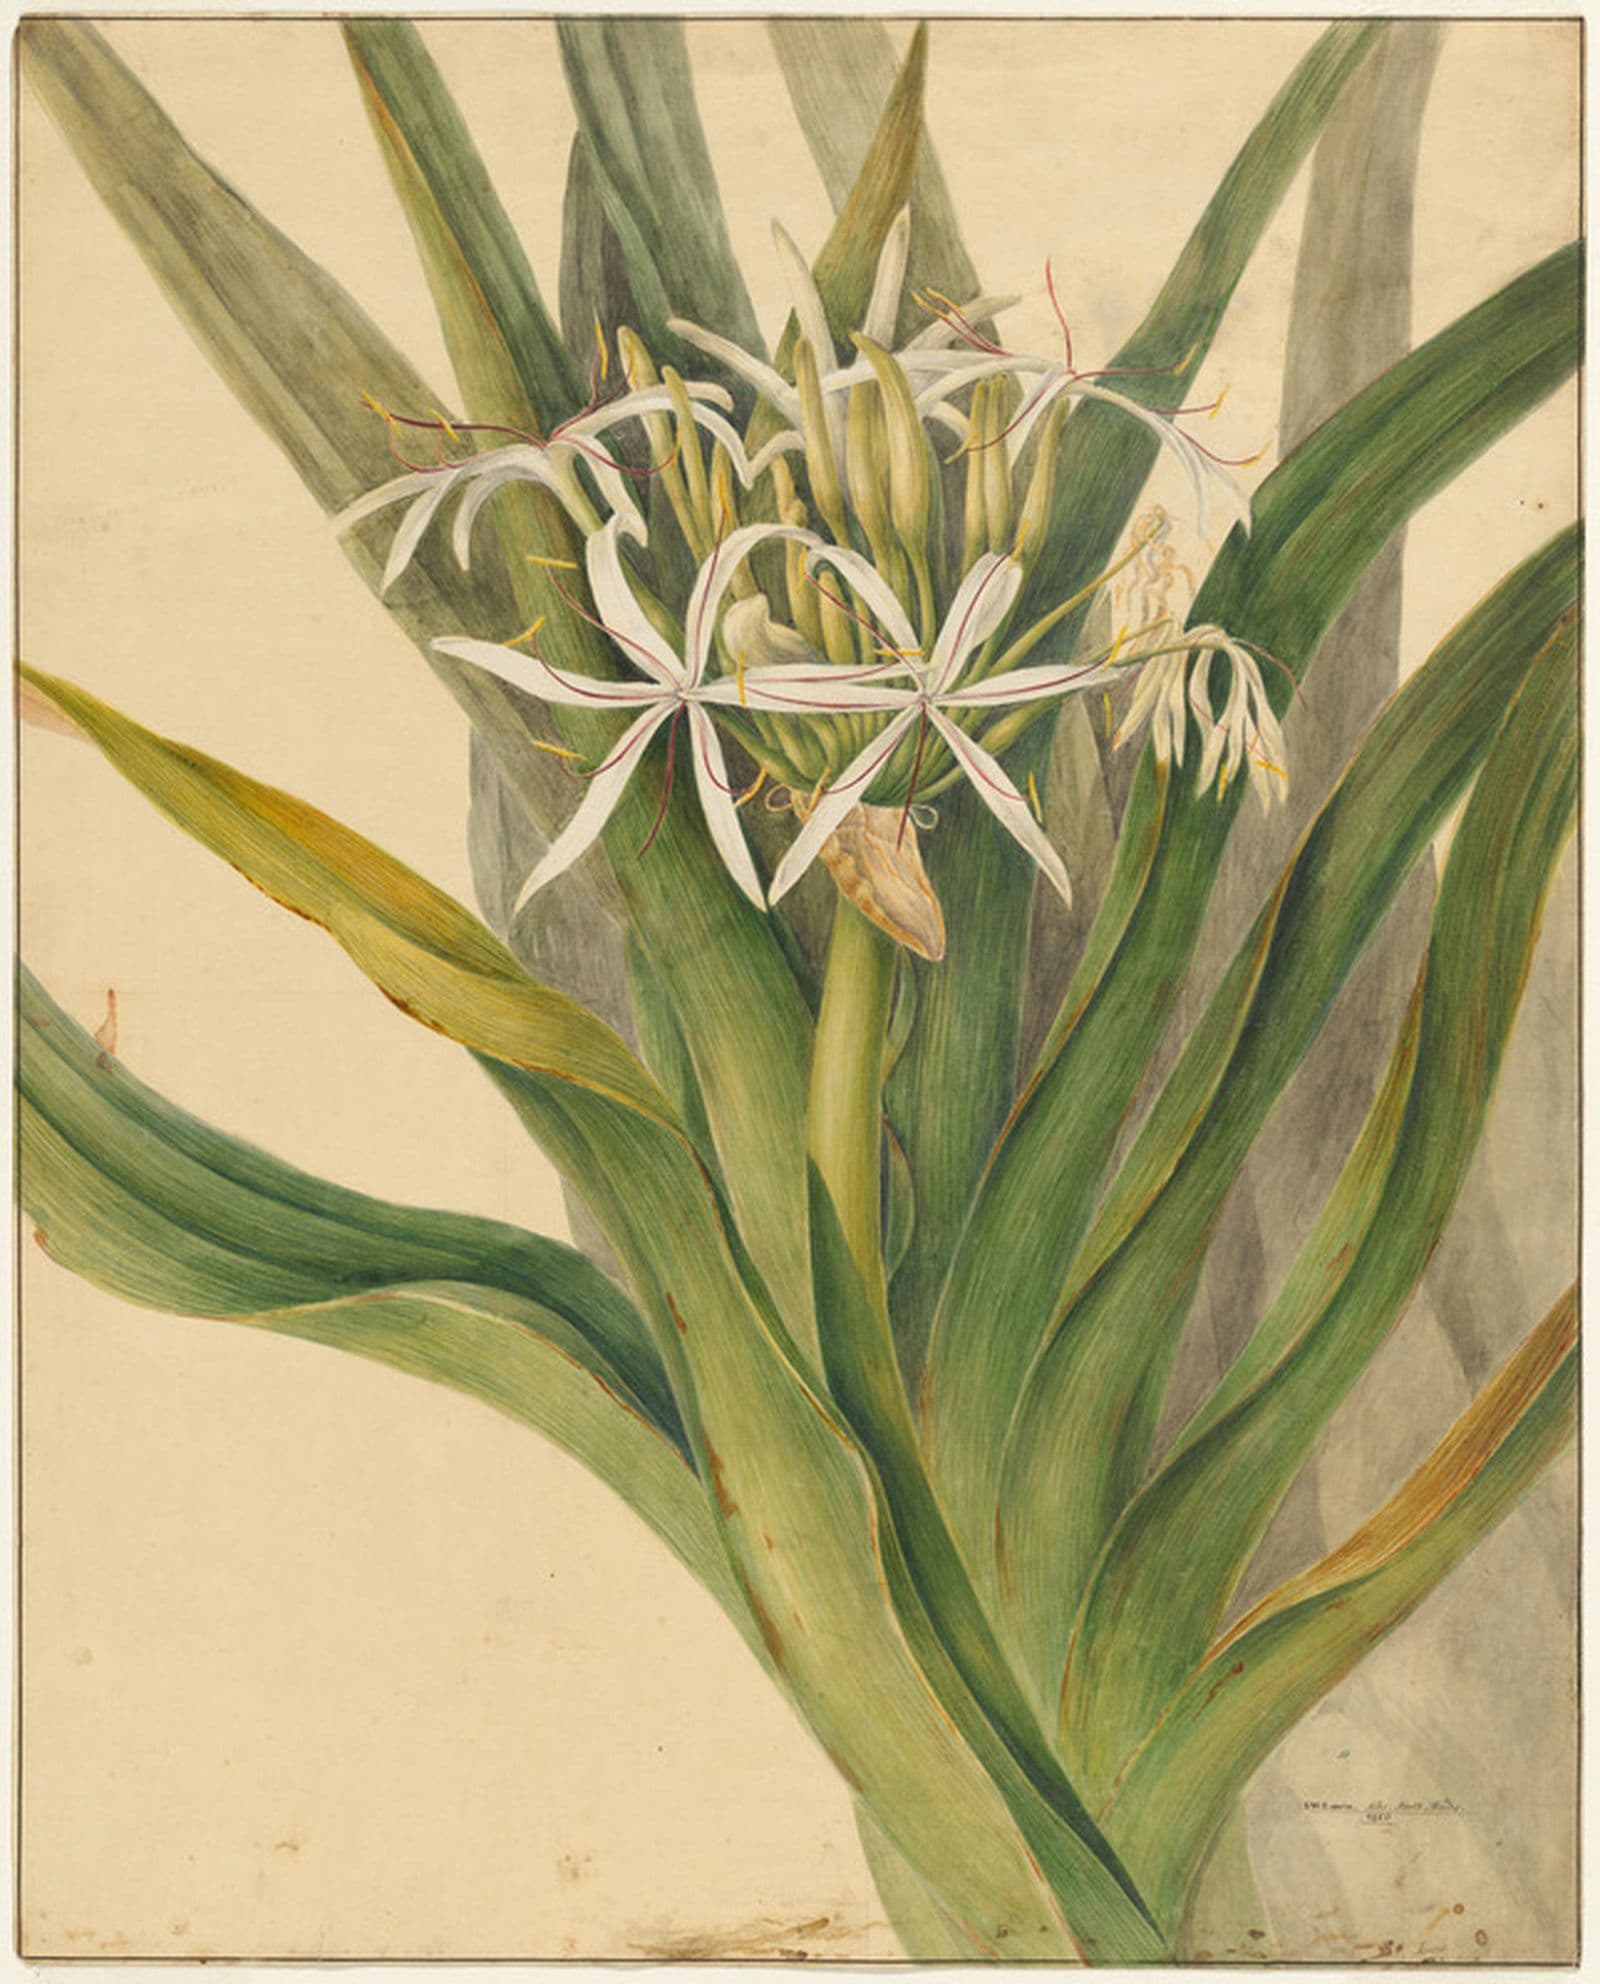 Watercolour of small white flowers surrounded by large green leaves